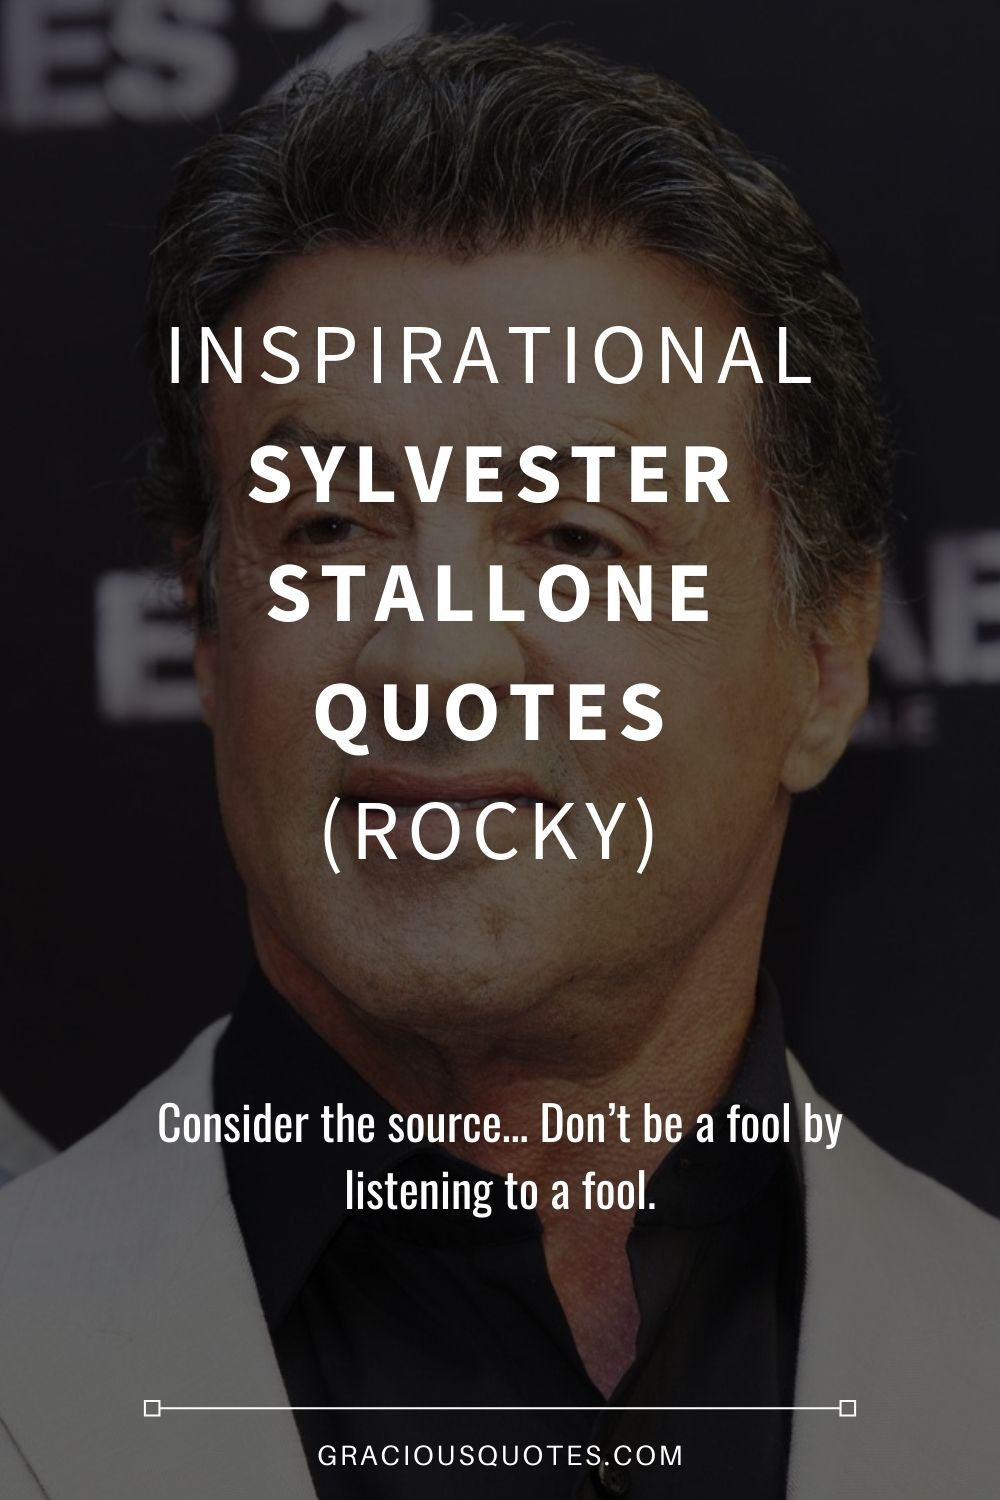 43 Inspirational Sylvester Stallone Quotes (ROCKY)